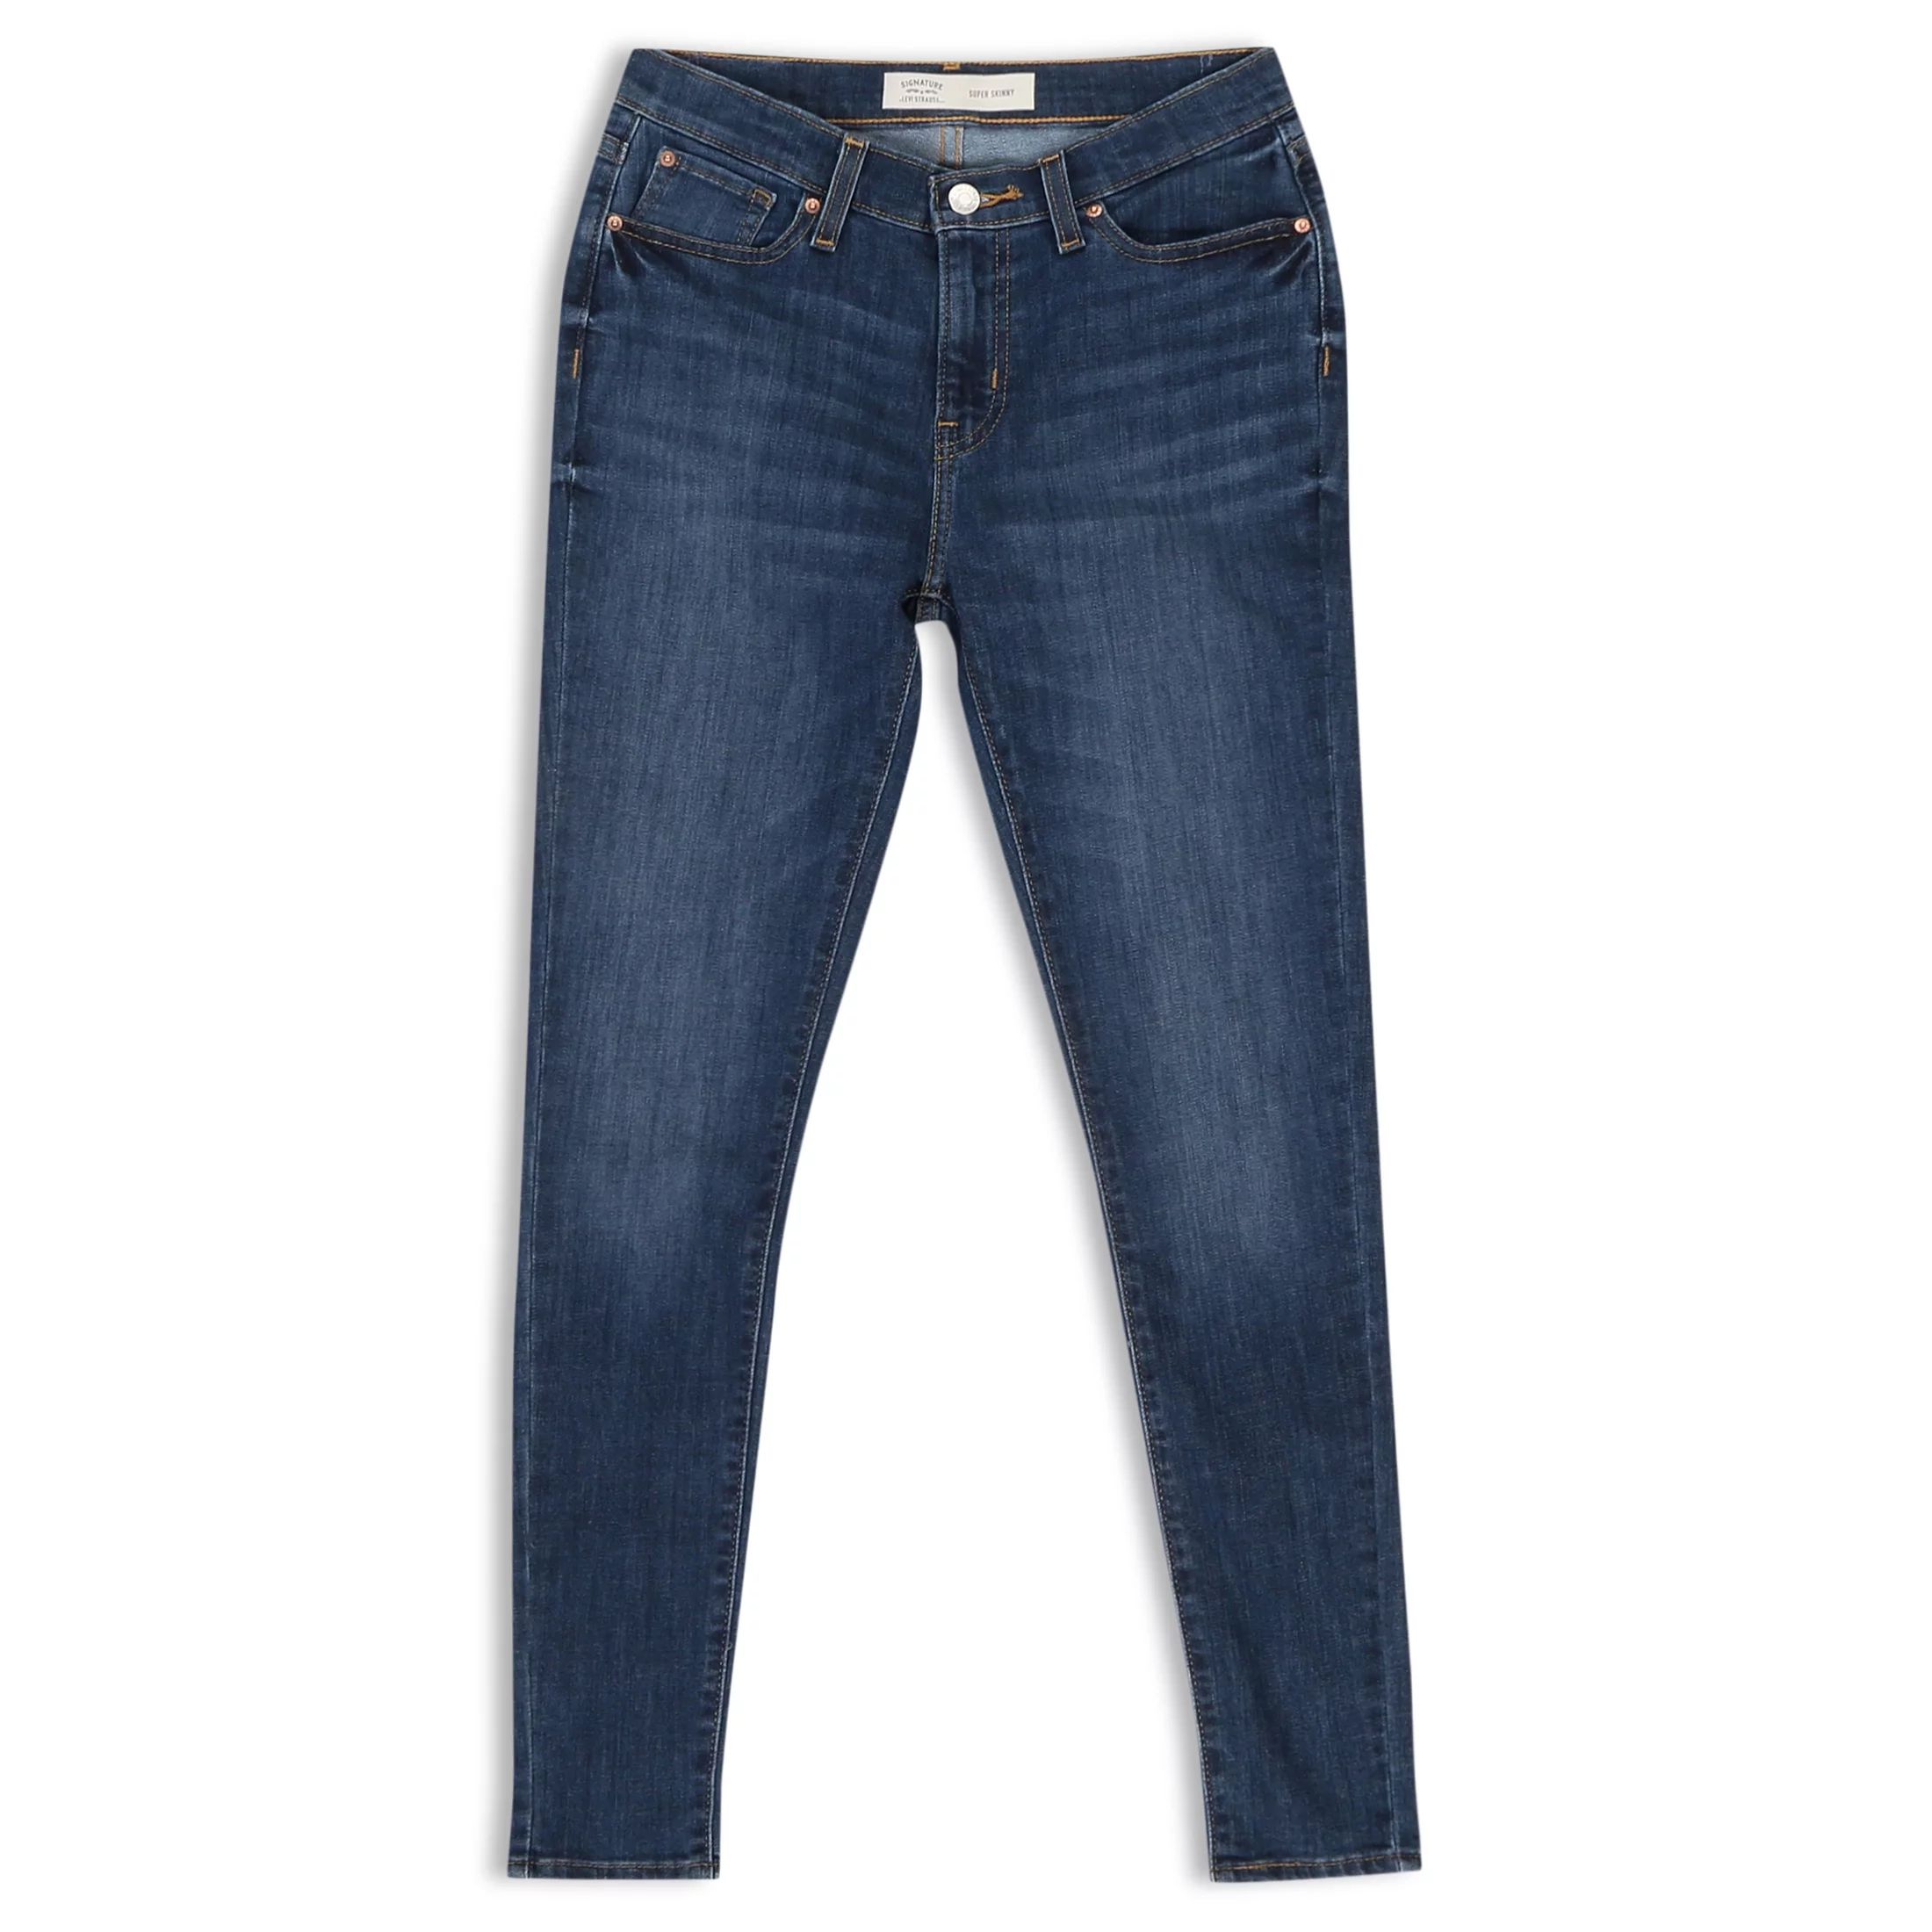 Signature by Levi Strauss & Co. Girls' Super Skinny Jeans, Sizes 5-18 | Walmart (US)